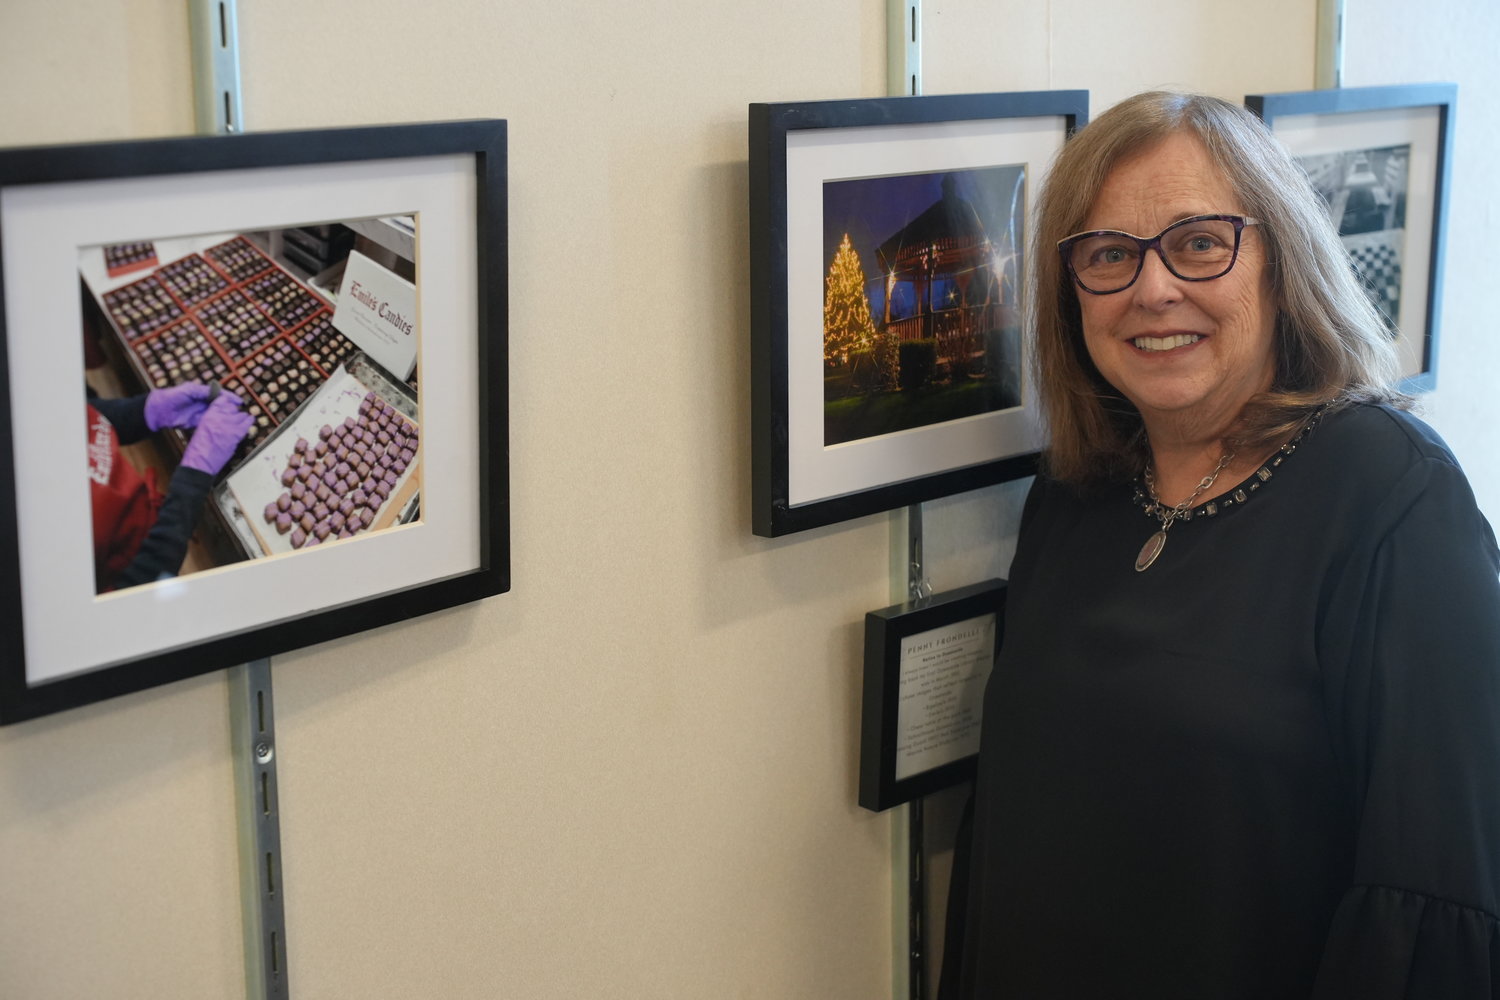 Photographer Penny Frondelli explained her art that drew from inspiration in Oceanside. Frondelli came to the Oceanside Library last year with an idea to create the Photography Club.